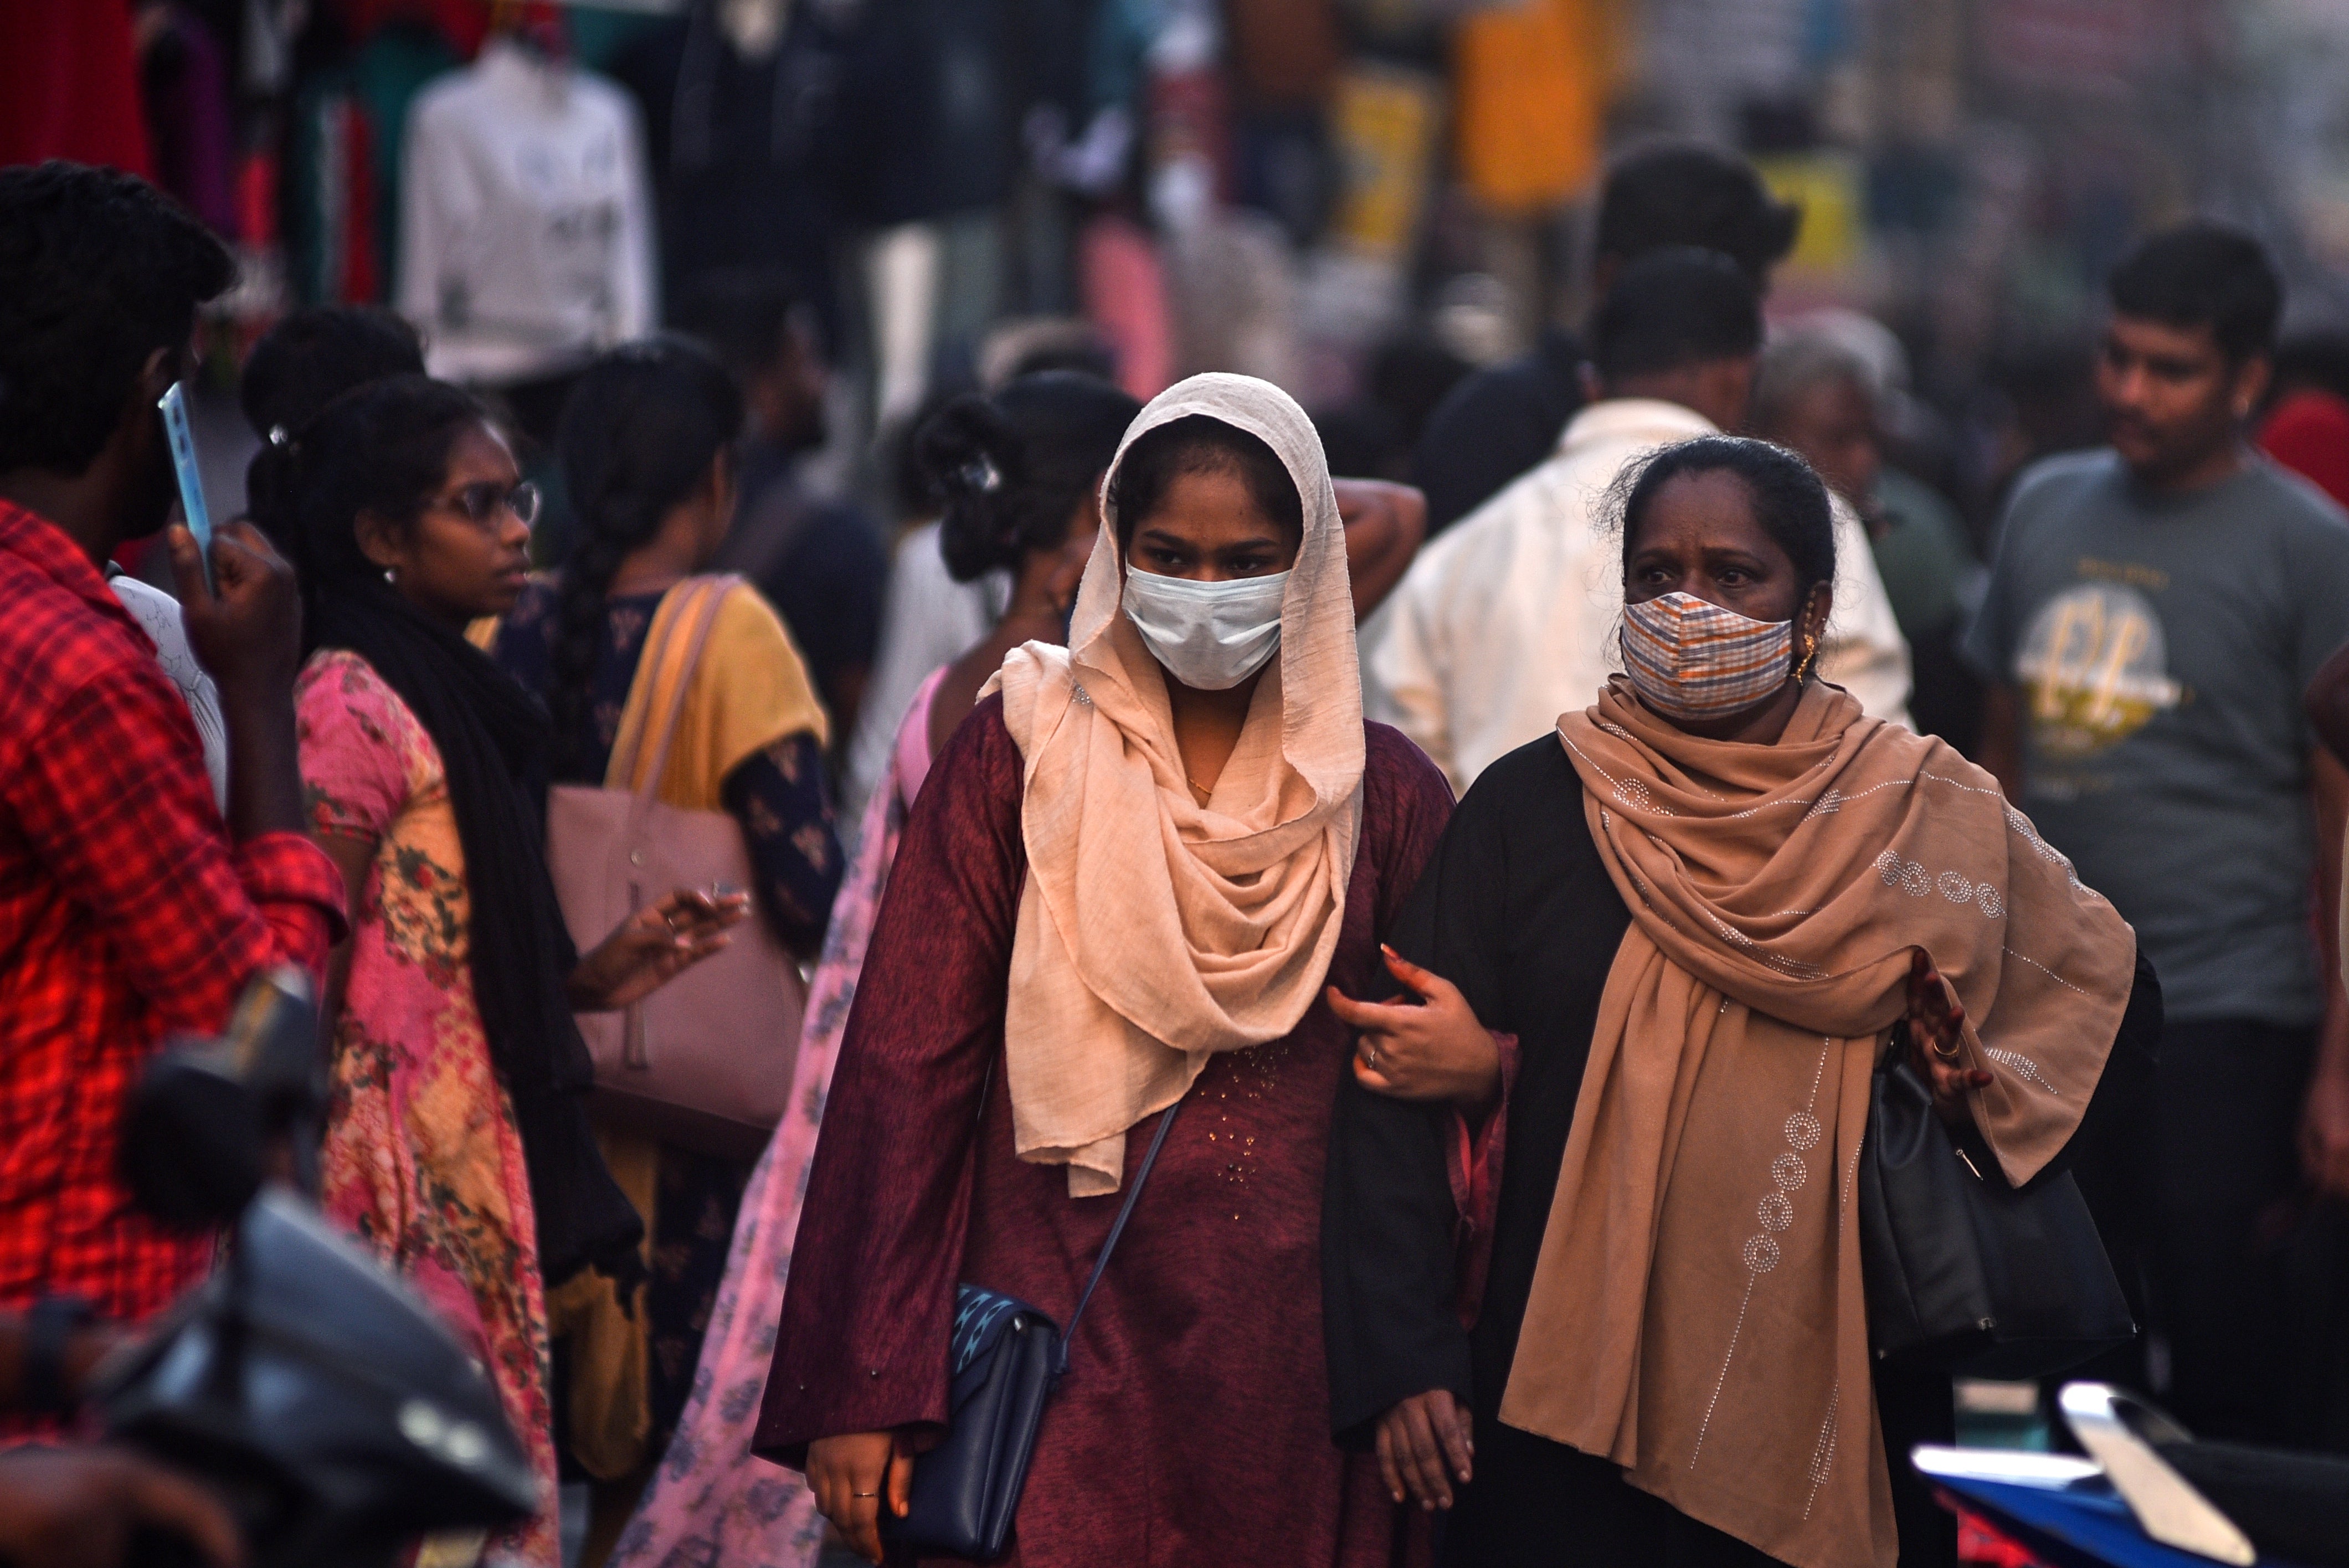 Women wear masks as they pass through a crowded street, amidst the spike in Covid-19 cases